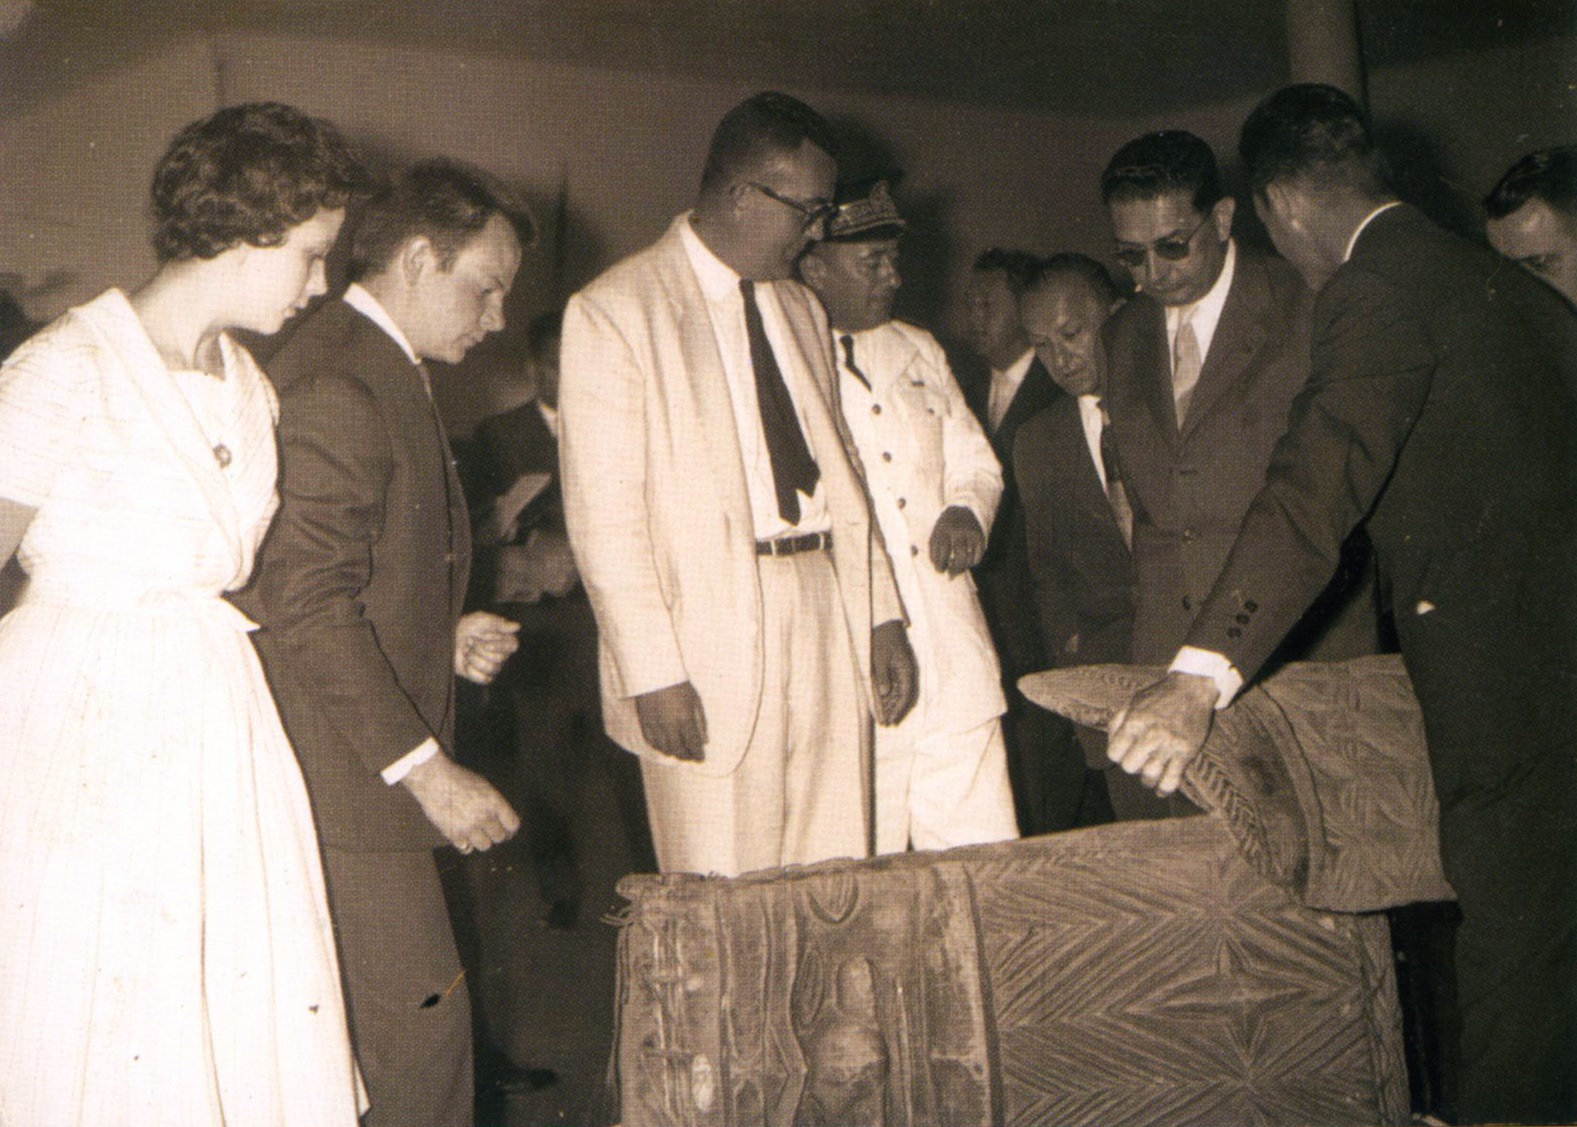 Nicolaï Michoutouchkine with the governor of New Caledonia, Aime Grimald, at an exhibition at the Noumea Museum, c. 1958, image courtesy of Aloï Pilioko